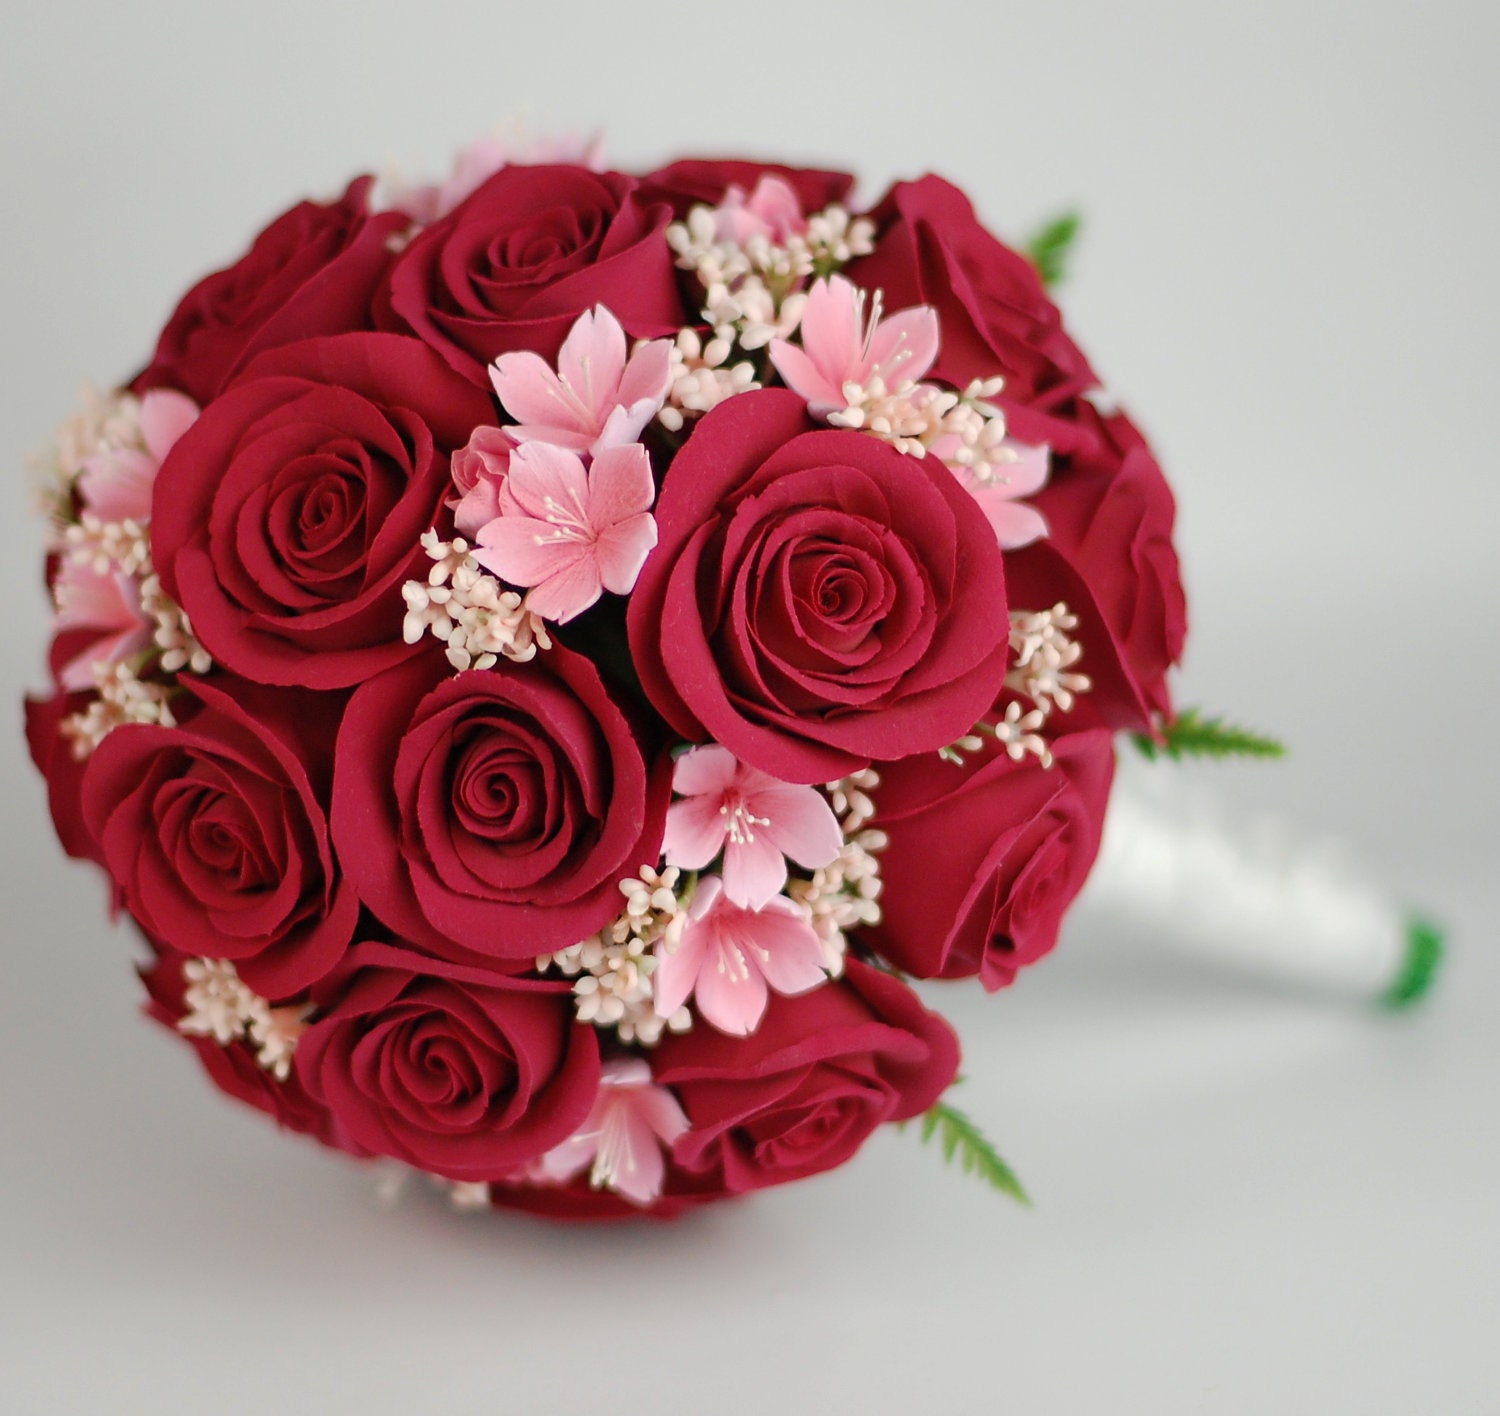  Order Keepsake Red Roses with Pink Sakura Cherry Blossom Bridal Bouquet